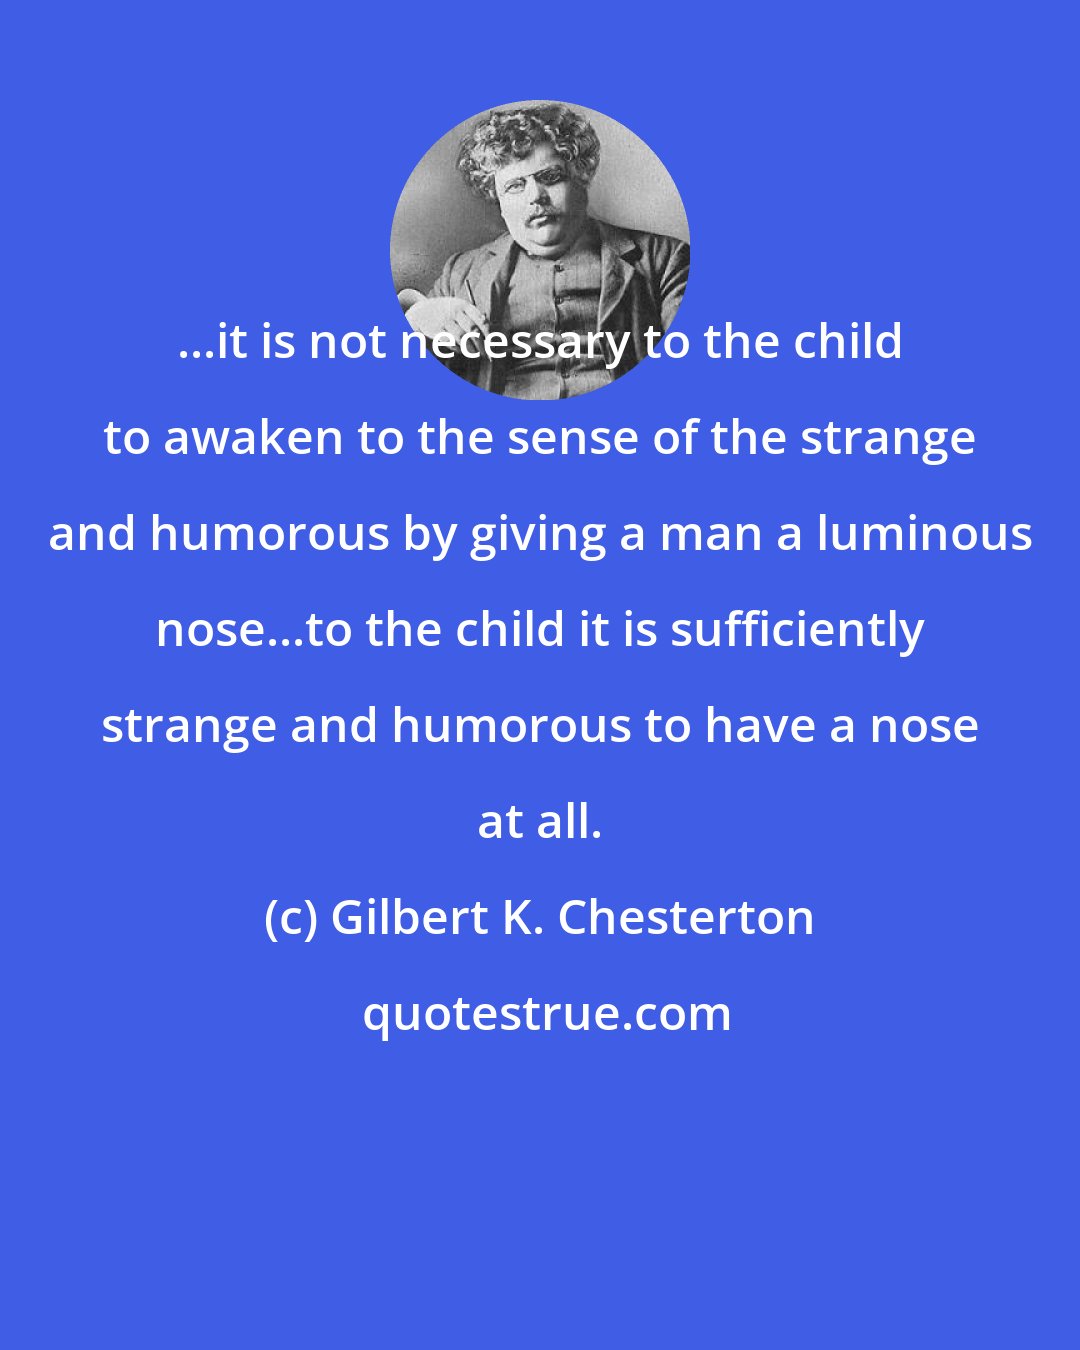 Gilbert K. Chesterton: ...it is not necessary to the child to awaken to the sense of the strange and humorous by giving a man a luminous nose...to the child it is sufficiently strange and humorous to have a nose at all.